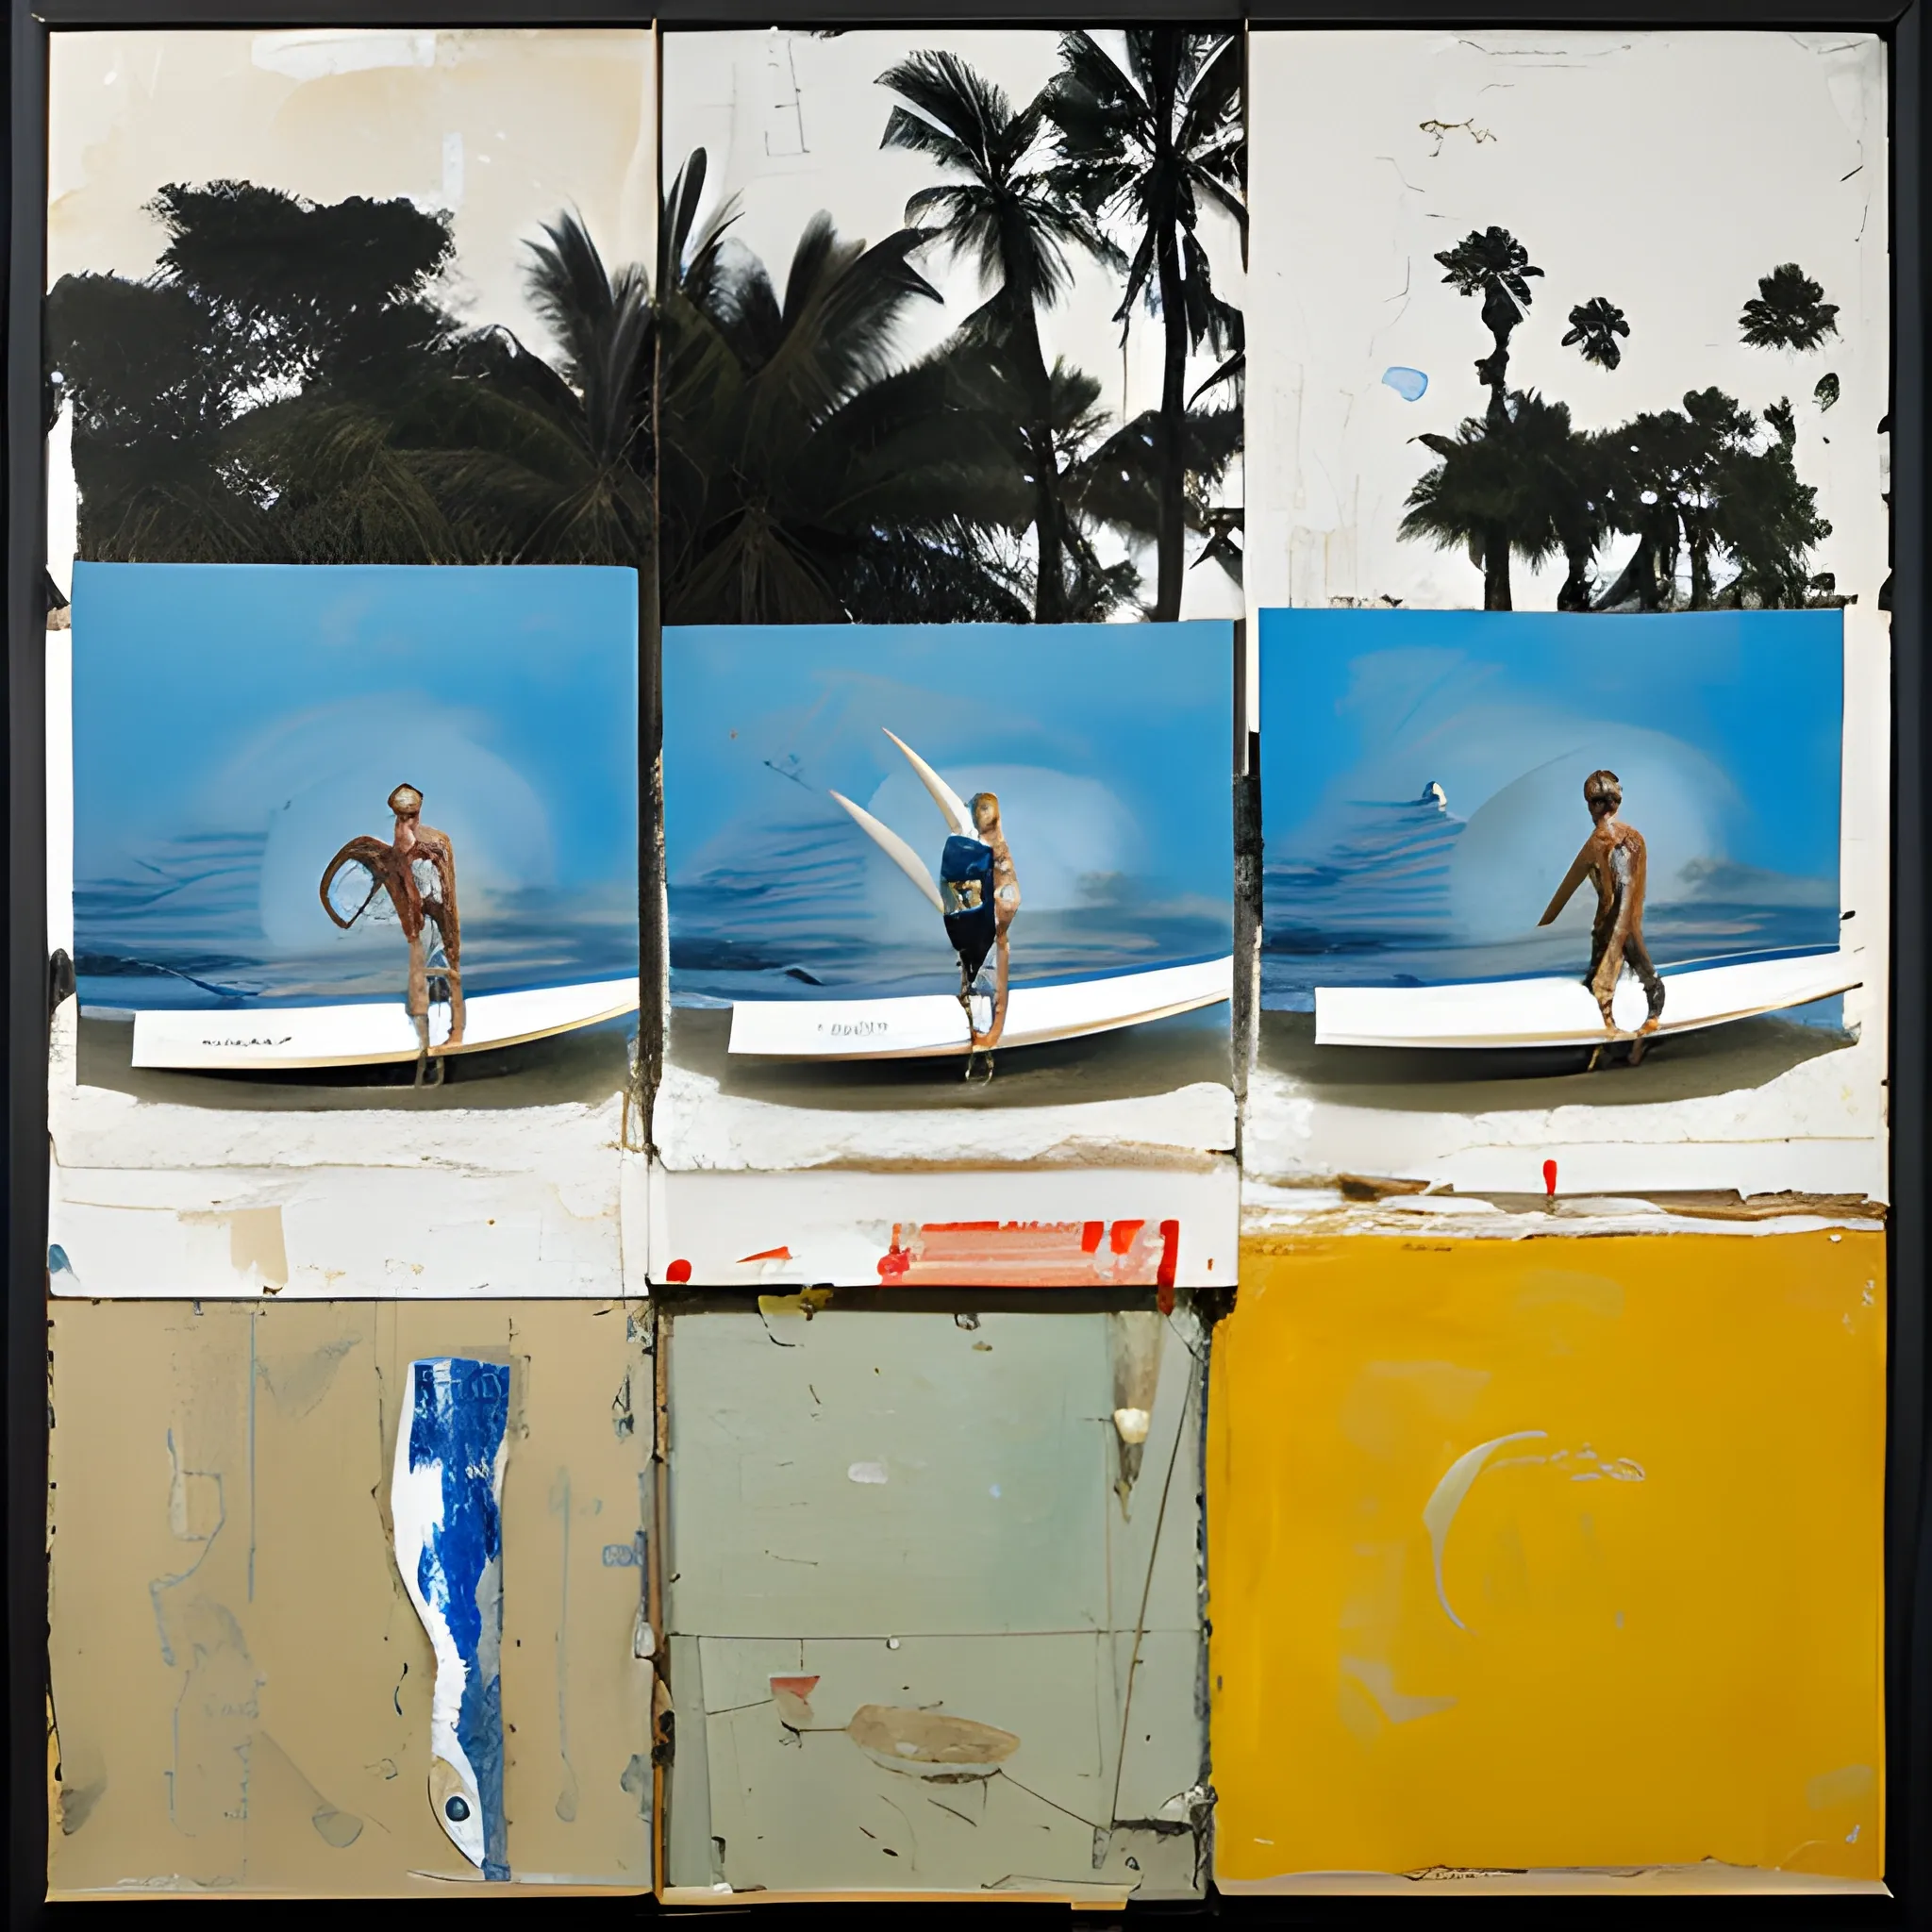  Robert Rauschenberg painting about surfing and camping